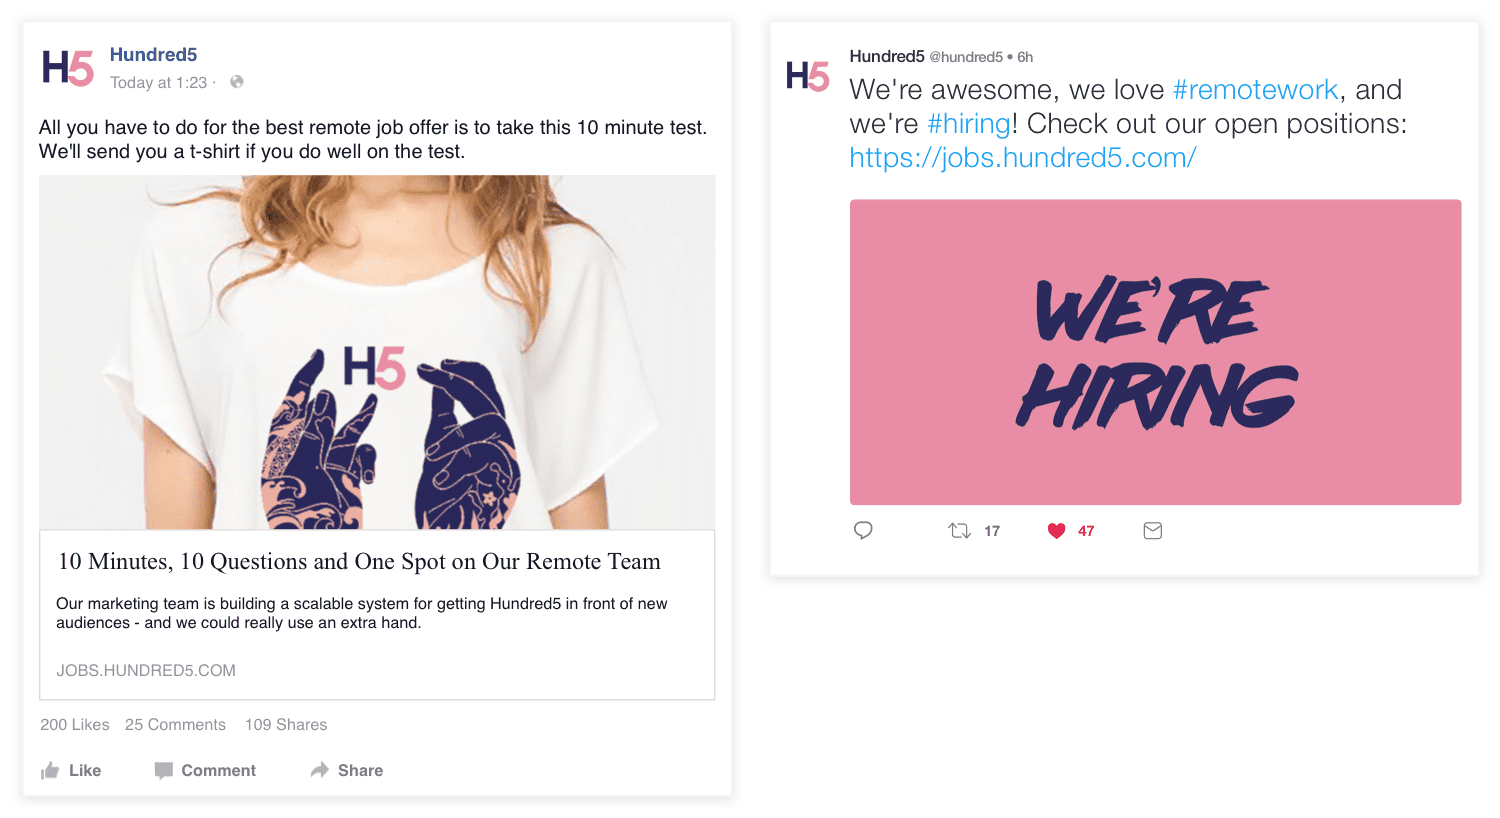 Back when Toggl Hire was Hundred5 - we created a job ad on Facebook for our open positions